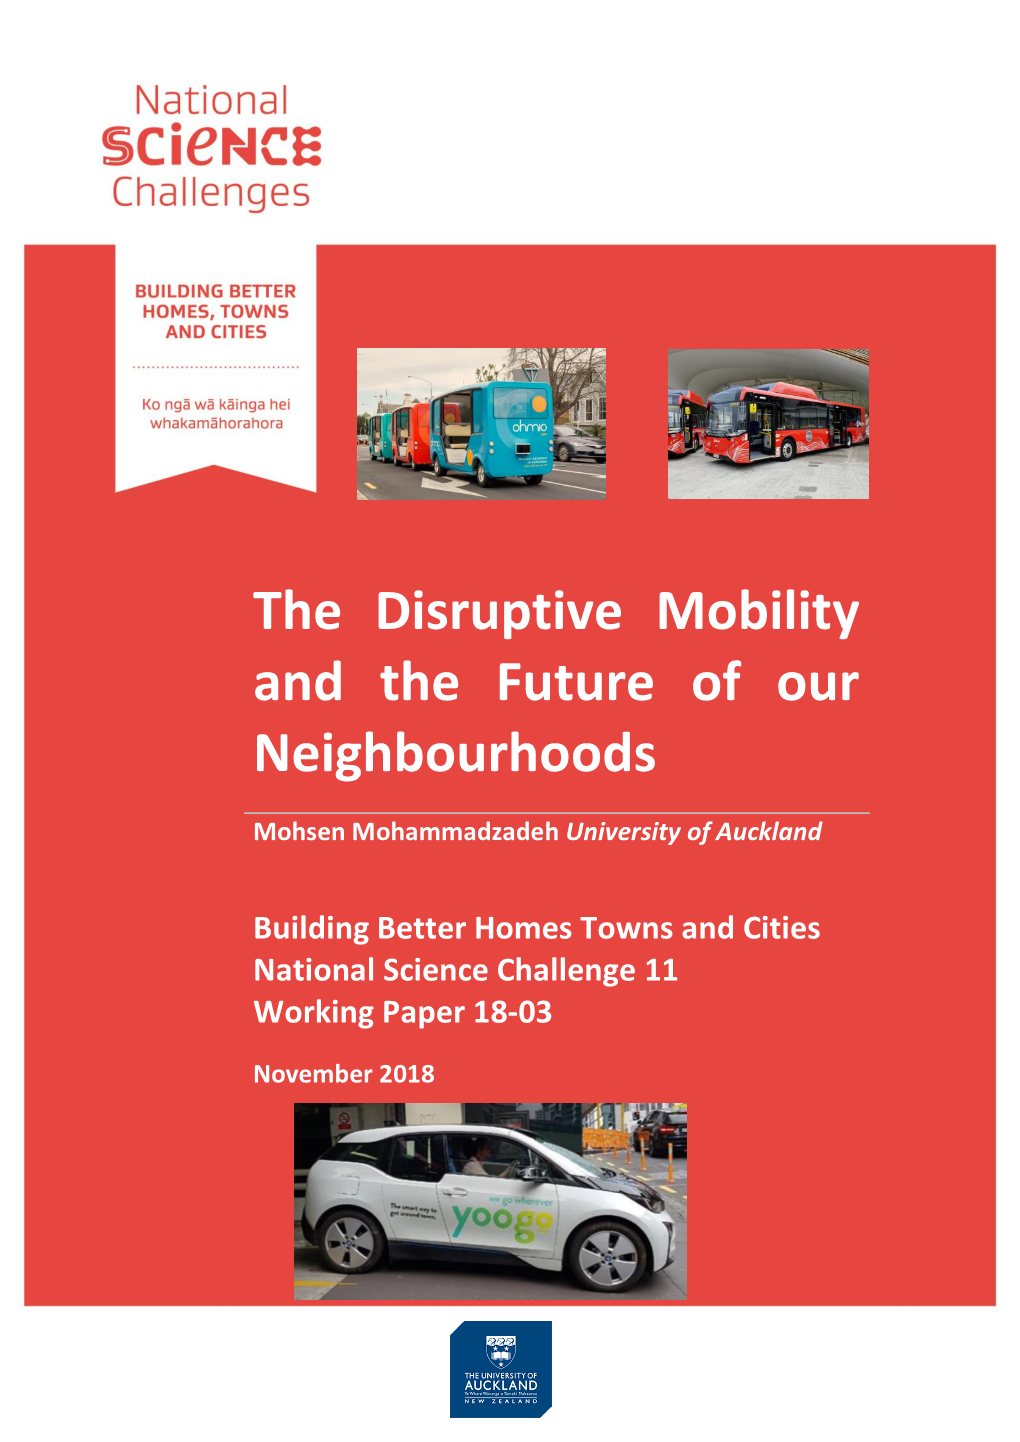 The Disruptive Mobility and the Future of Our Neighbourhoods